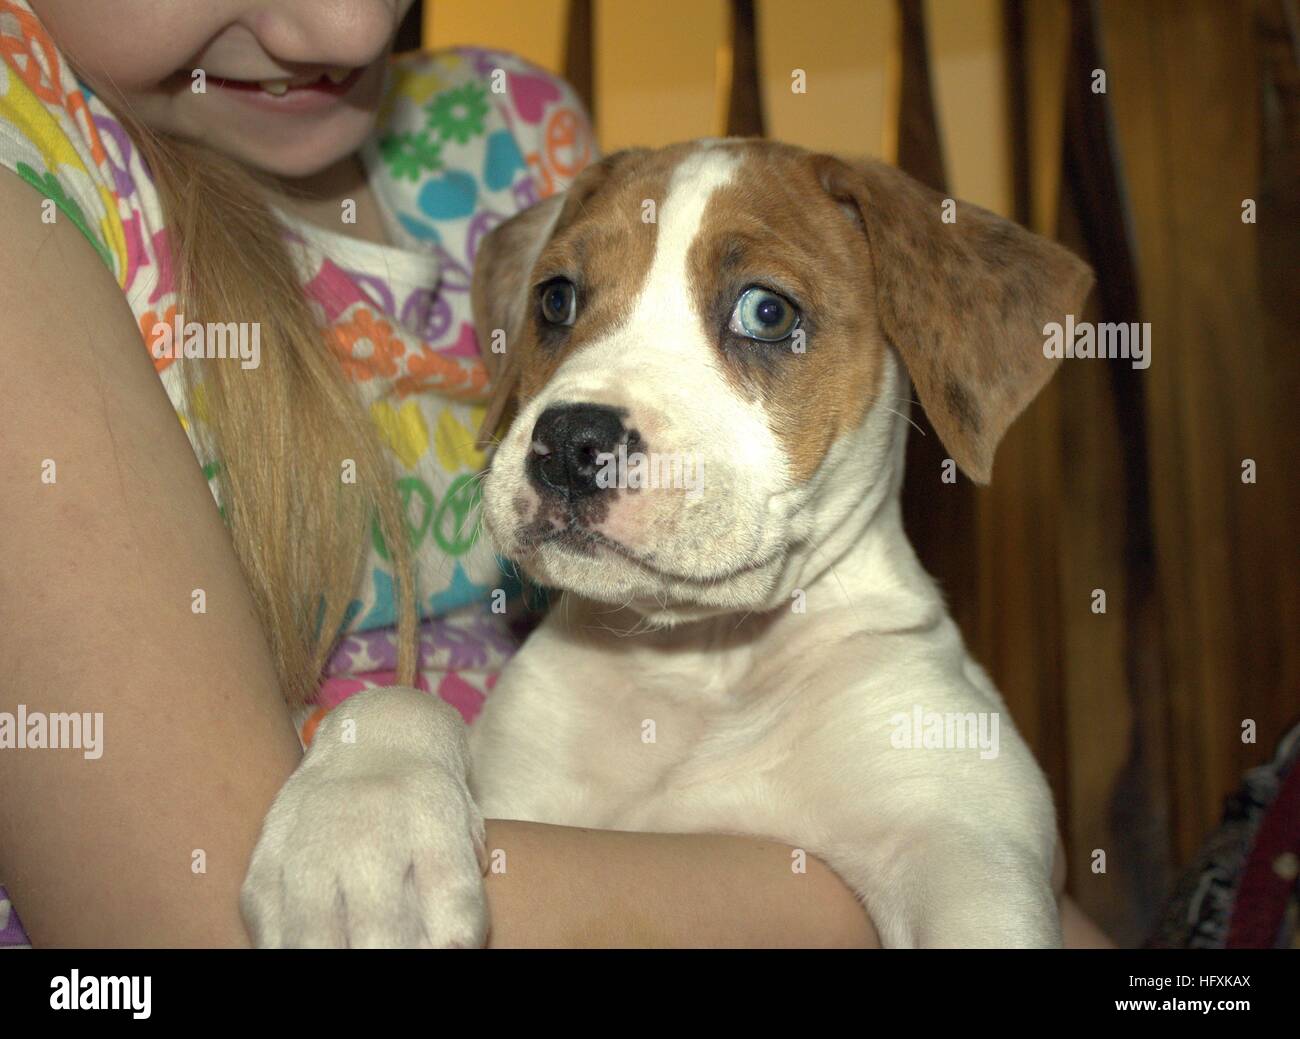 Little Girl Holding Her New Smiling Puppy Stock Photo